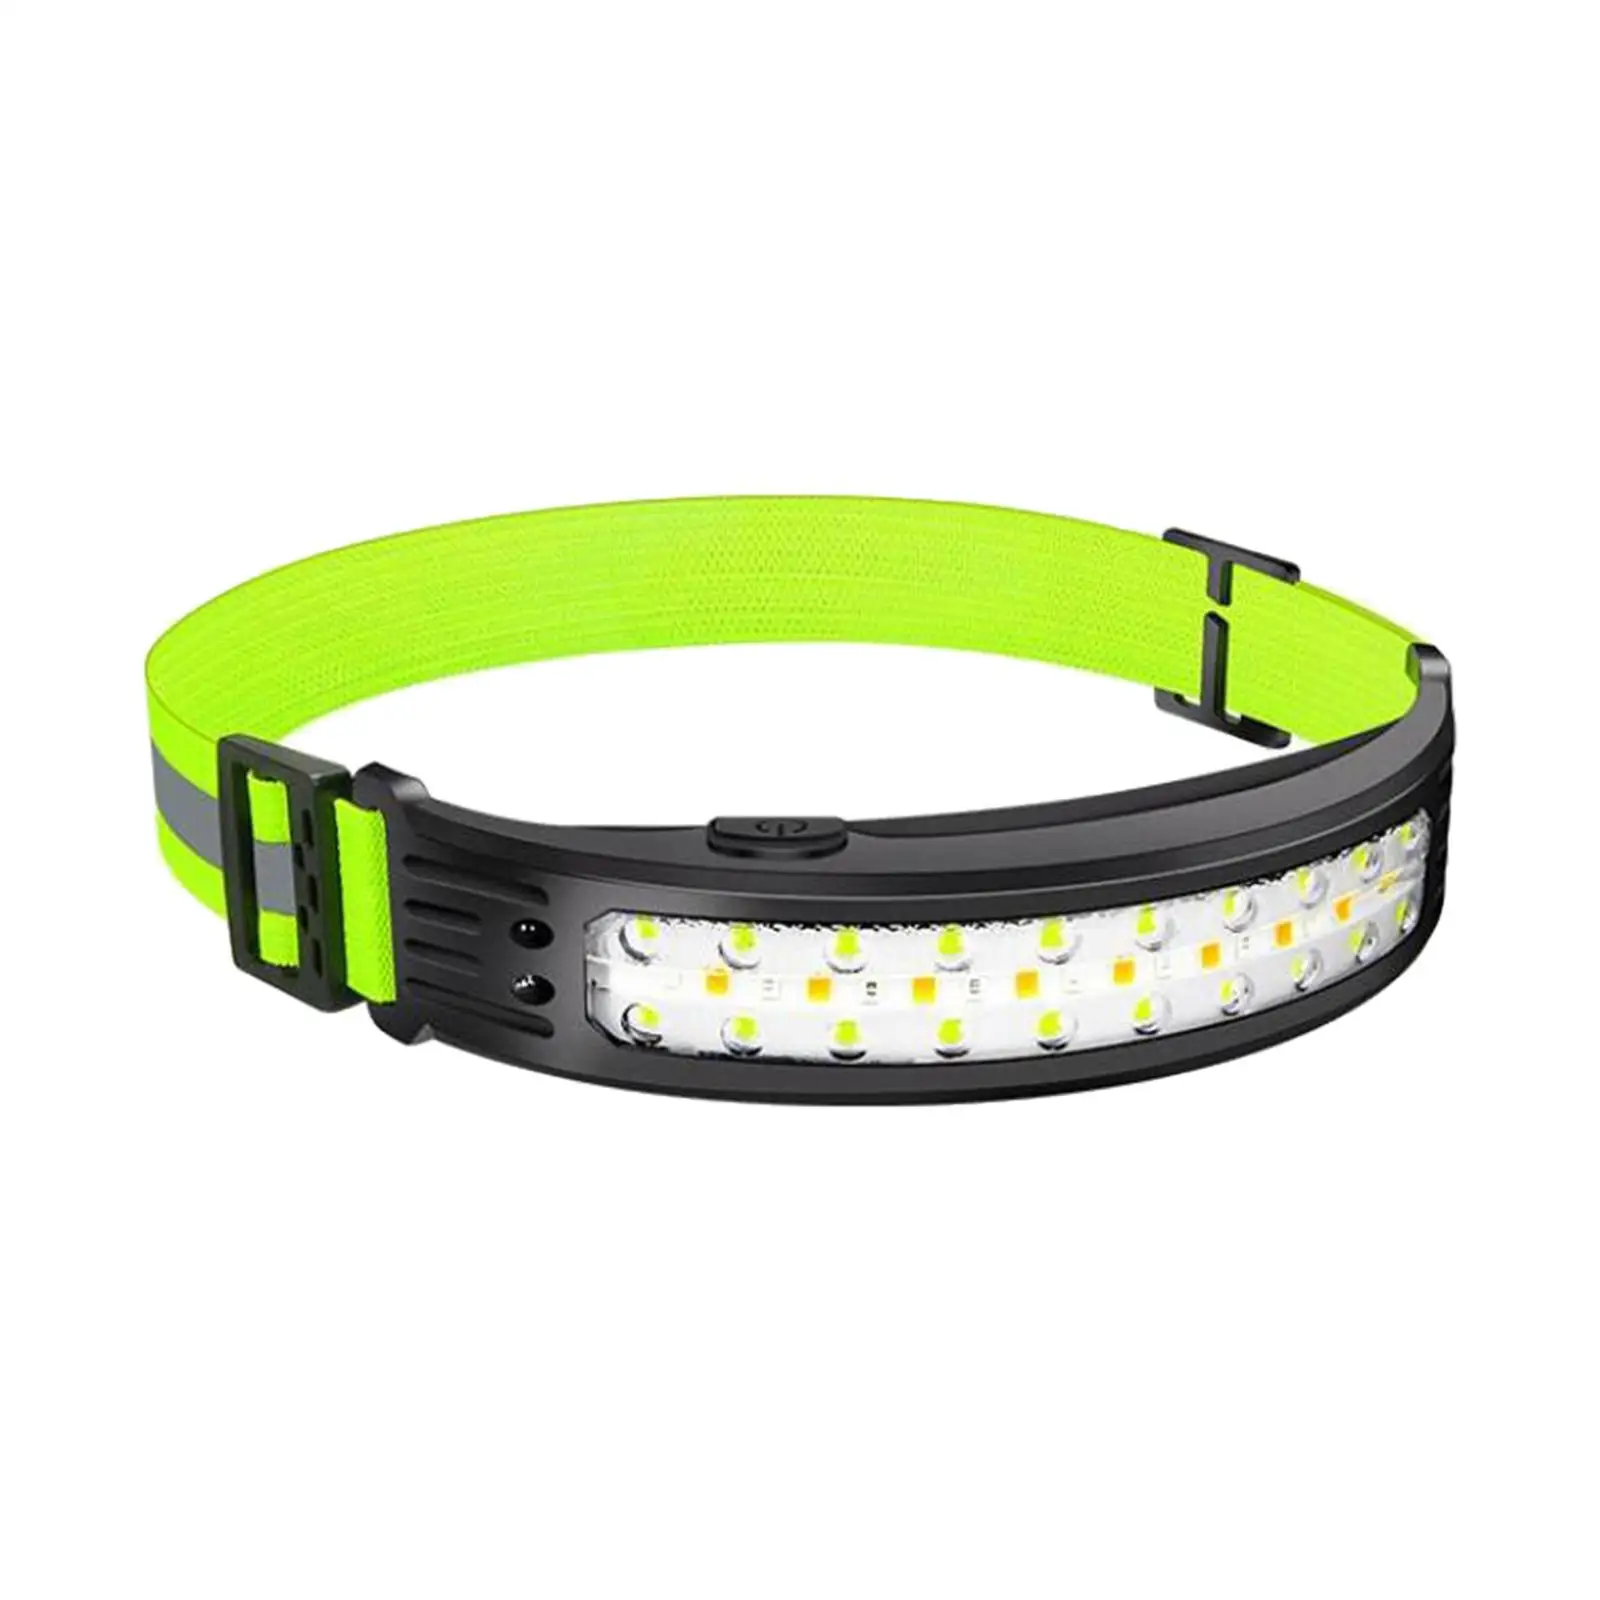 COB LED Headlamp Wide Beam Waterproof Durable 5 Modes Lights COB Induction Headlamp for Running Hiking Jogging Outing Camping